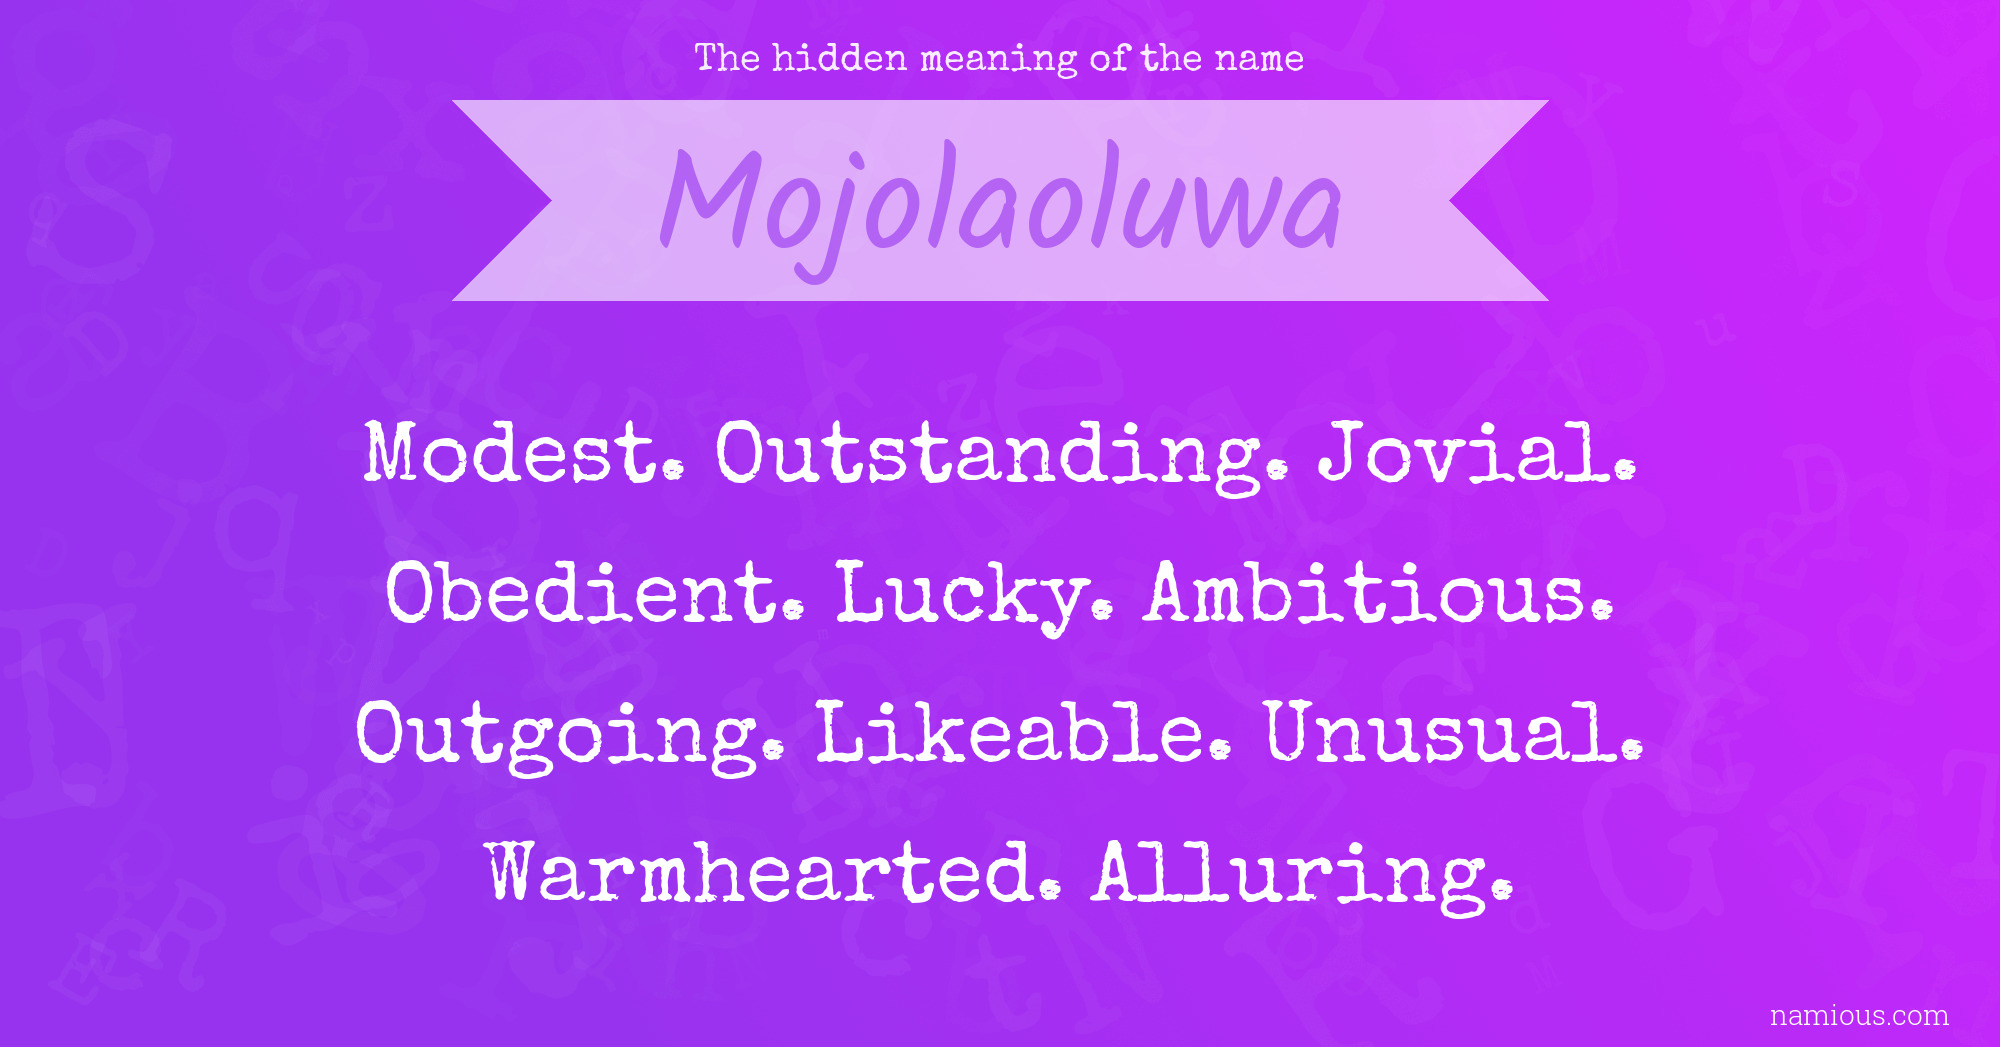 The hidden meaning of the name Mojolaoluwa